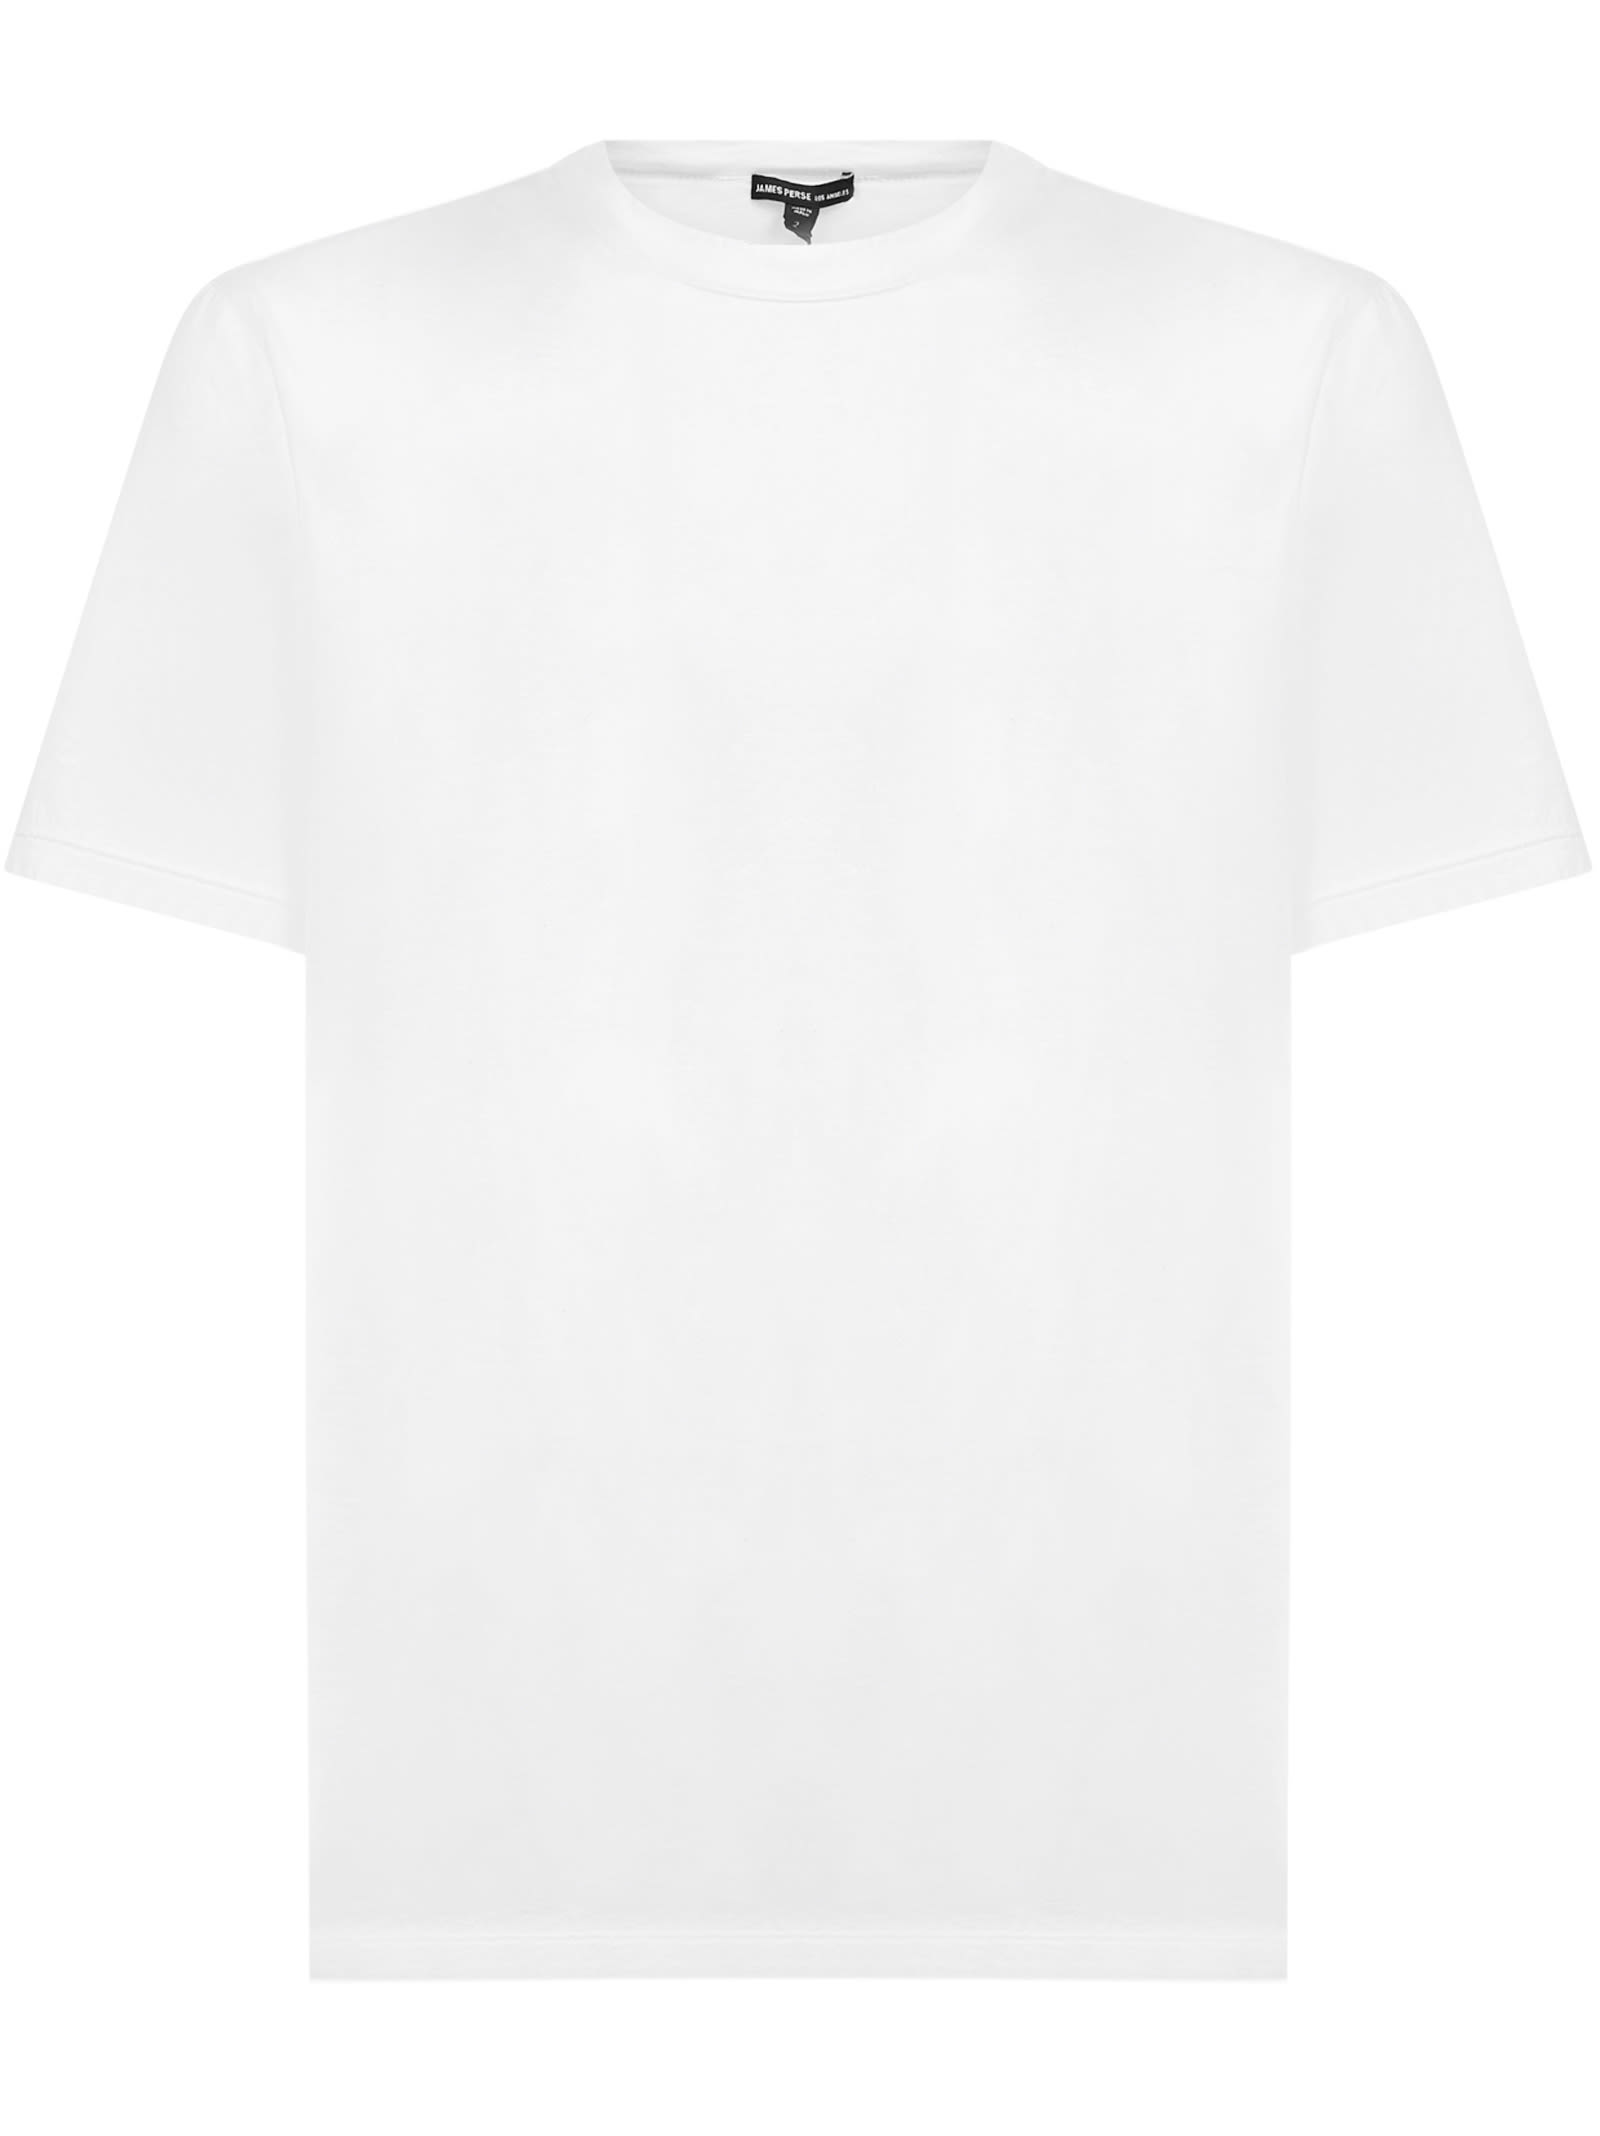 JAMES PERSE LUXE LOTUS JERSEY T-SHIRT,MELJ3199 WHT